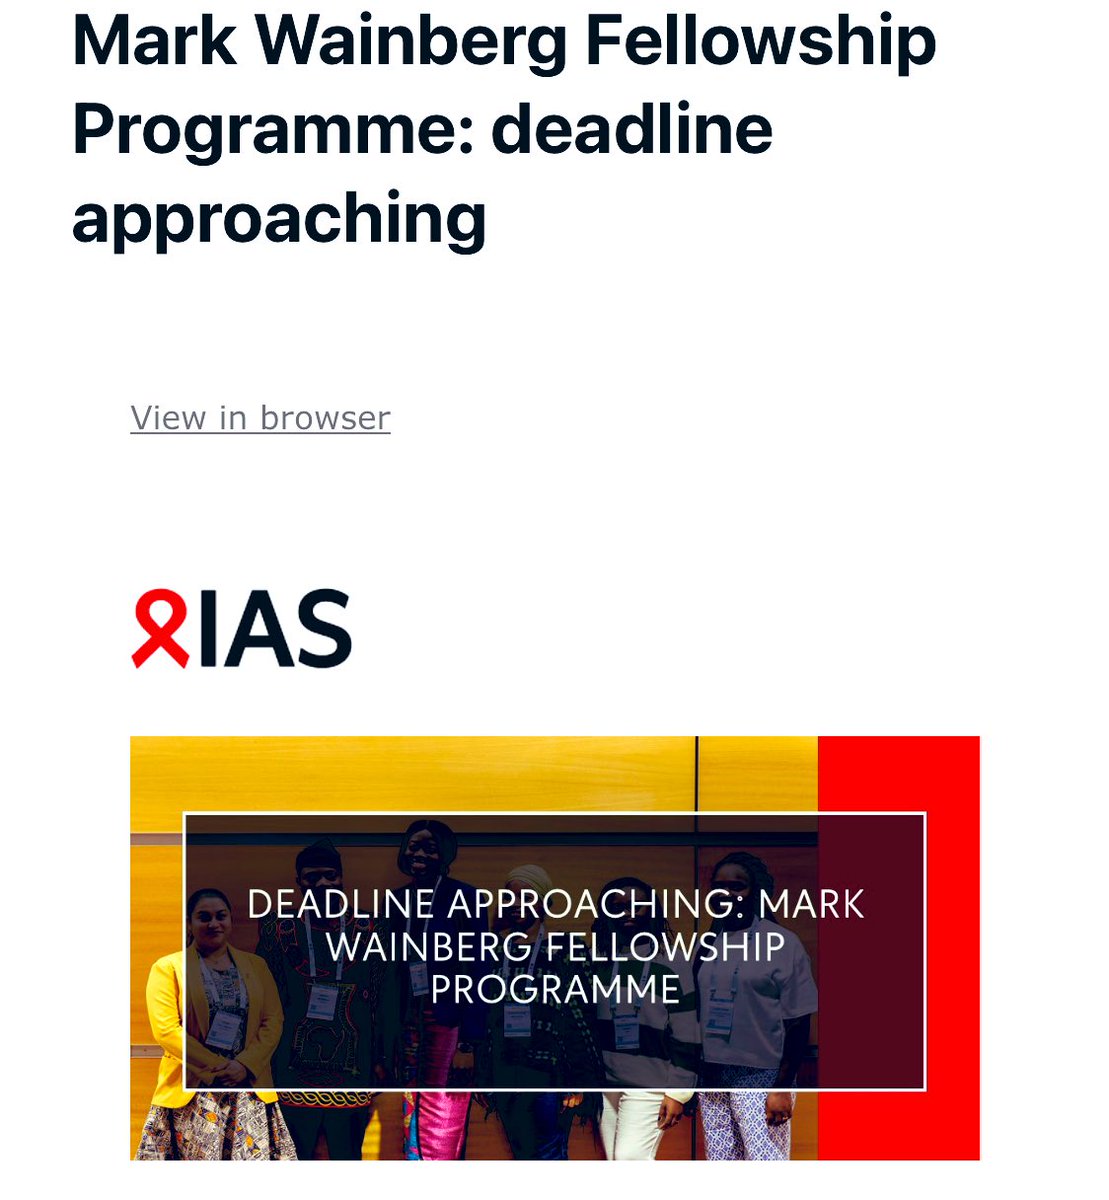 Are you a clinician working in central, eastern, southern and western Africa?Are you interested in becoming an HIV specialist? Apply for the @iasociety Mark Wainberg Fellowship to become an expert in research and HIV clinical science Deadline is Monday, 13 May, at 23:59 CET.